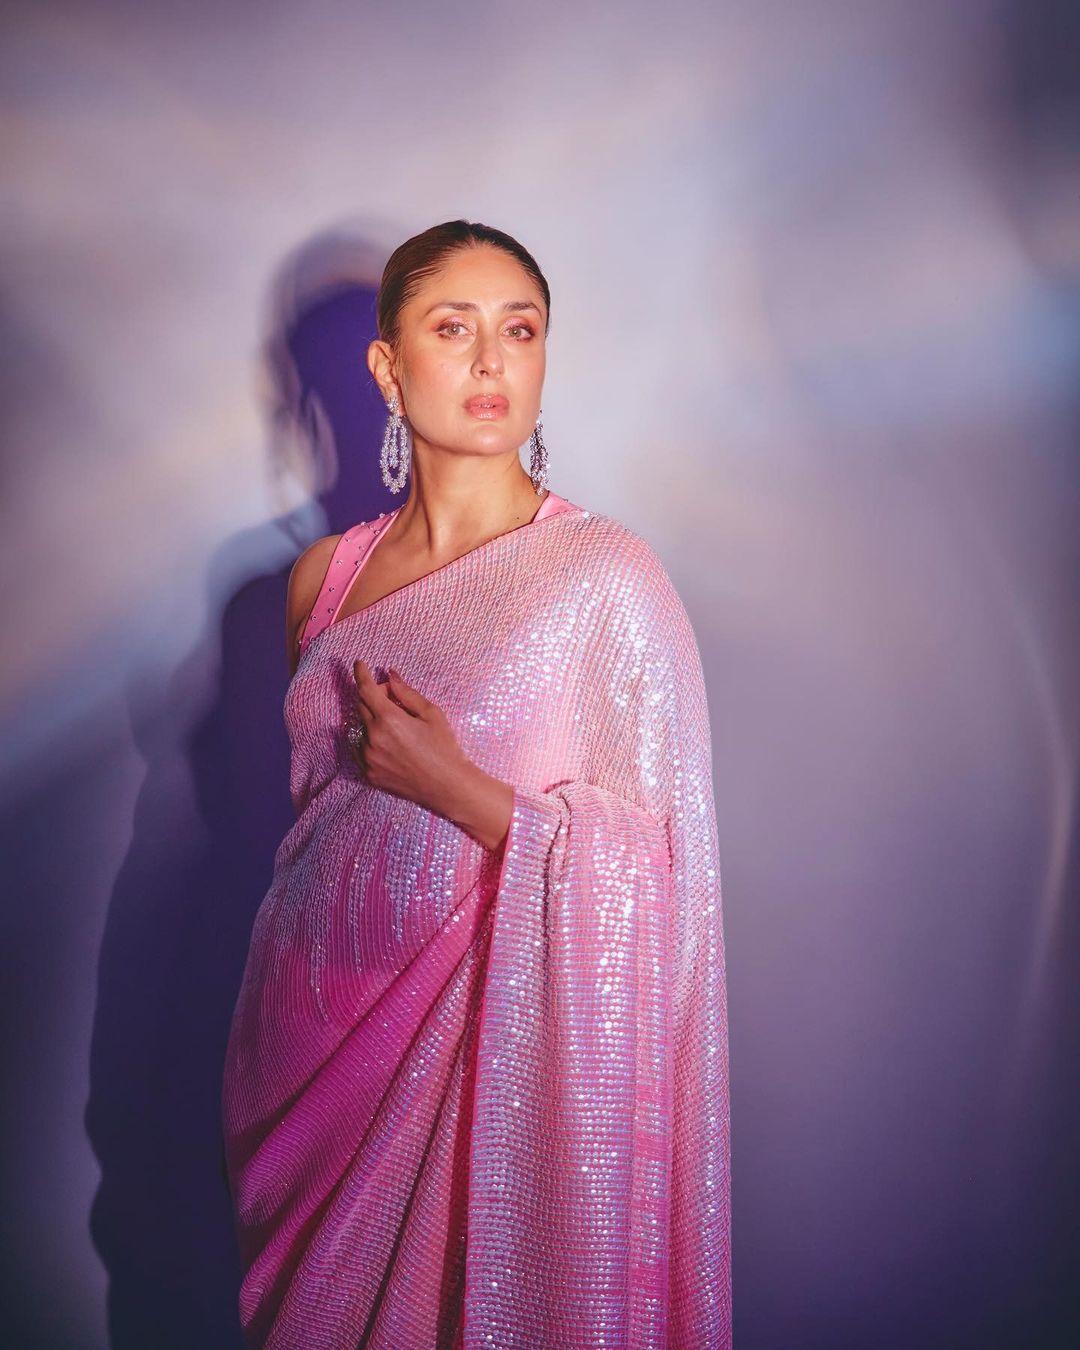 The six-yard wonder featured a delicate play of textures, with intricate embroidery and sequin work adorning the sheer pallu. The embellishments caught the light in a mesmerizing dance, casting a subtle shimmer that added an element of glamour to the ensemble. The border of the saree was exquisitely detailed, showcasing Manish Malhotra's signature design finesse.